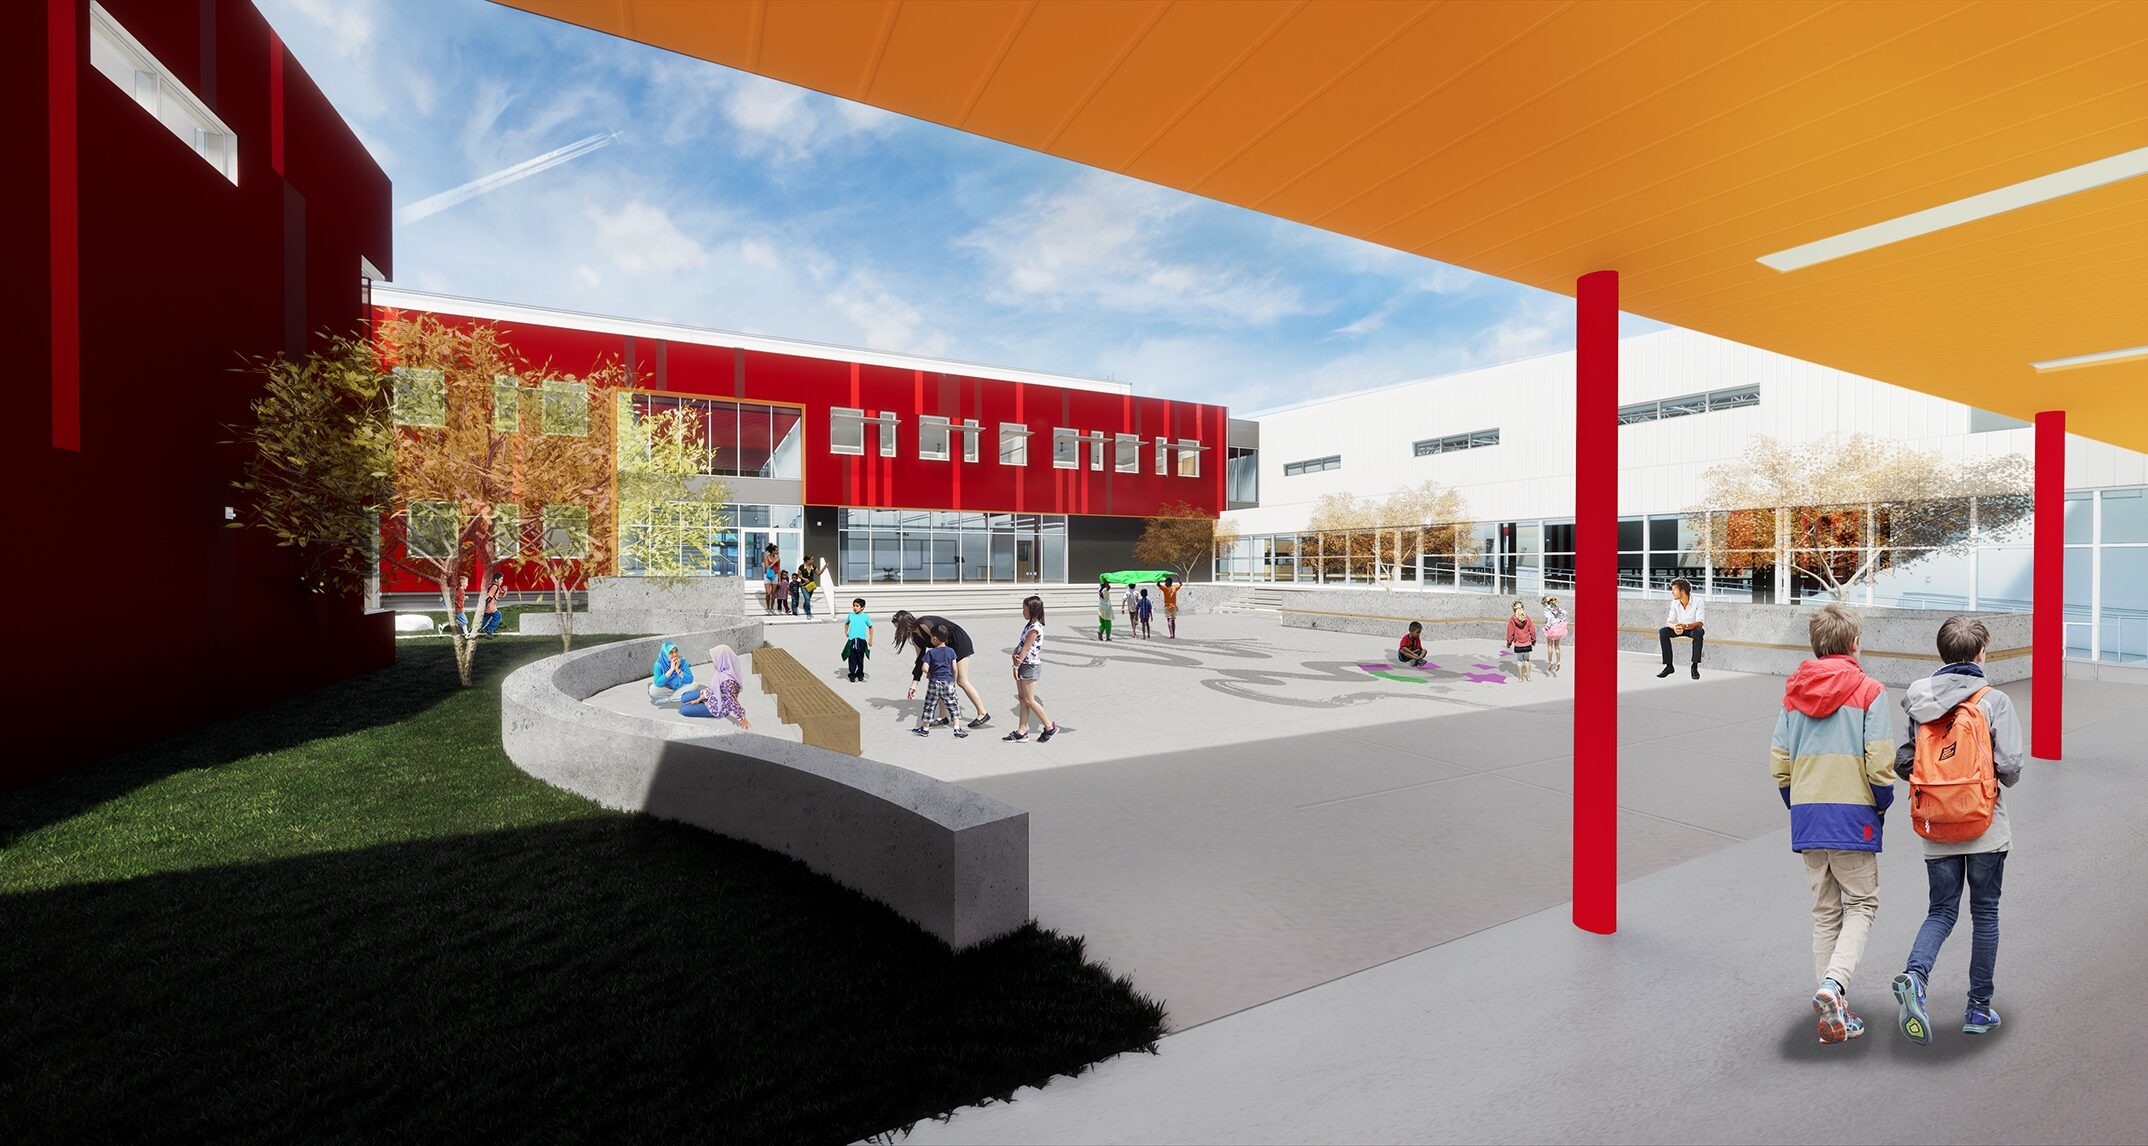 The central courtyard at Wing Luke Elementary provides a welcoming place for students and their families to gather, and support feelings of inclusion and belonging.